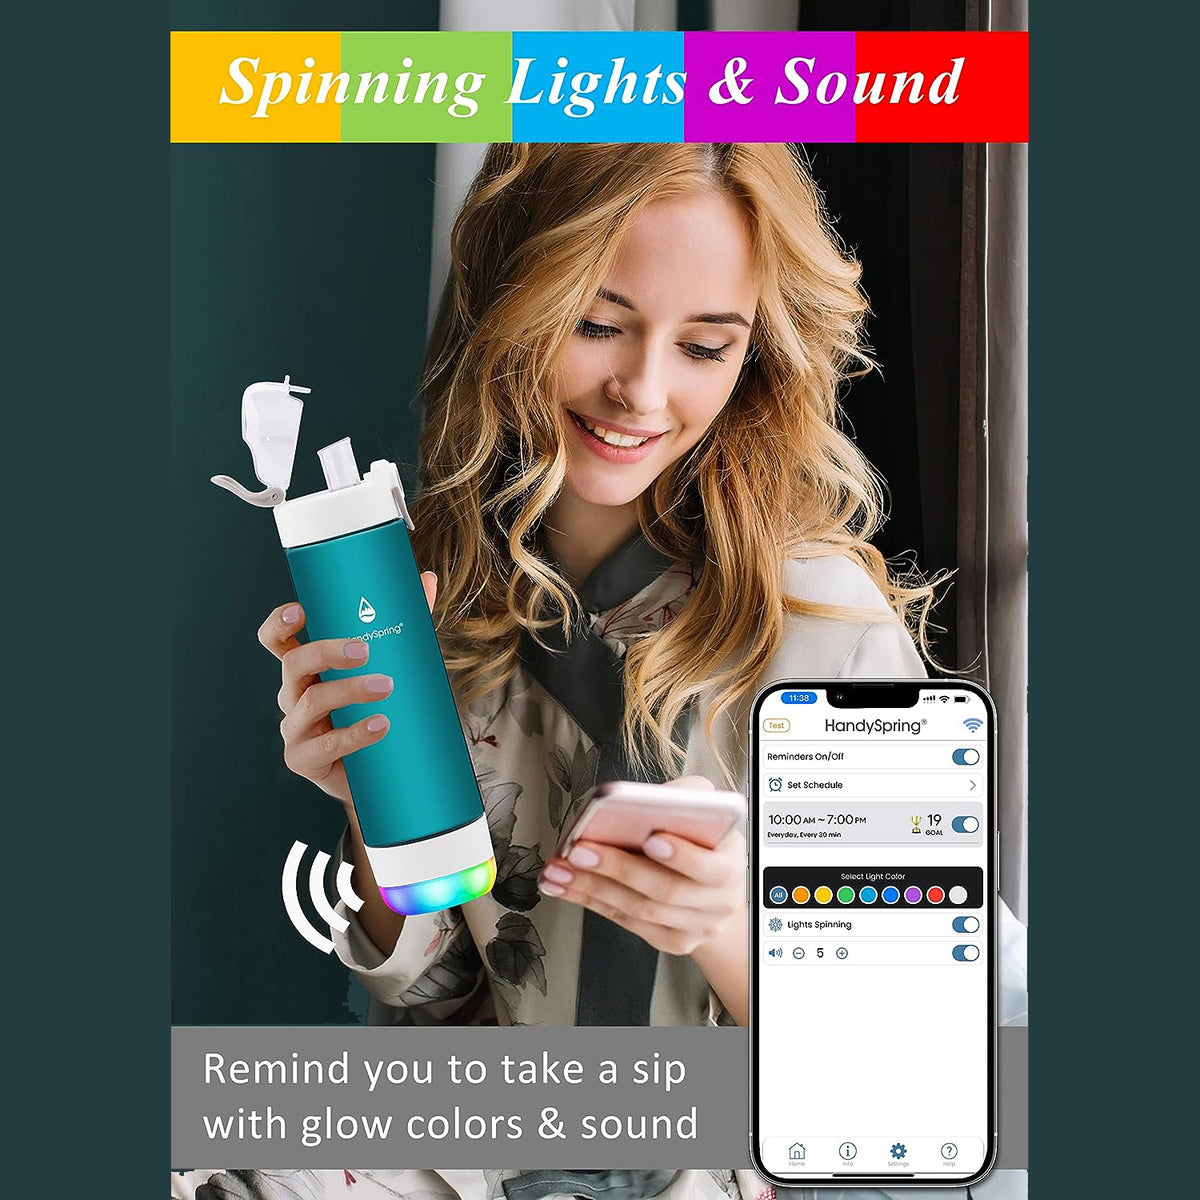 HandySpring - 26 oz Smart Water Bottle with Reminder to Drink Water - Lights & Sound Alert (Switchable) Hydrate Water Bottle, Water Tracker with Spout, Smart Hydration Light H(S)-01PE